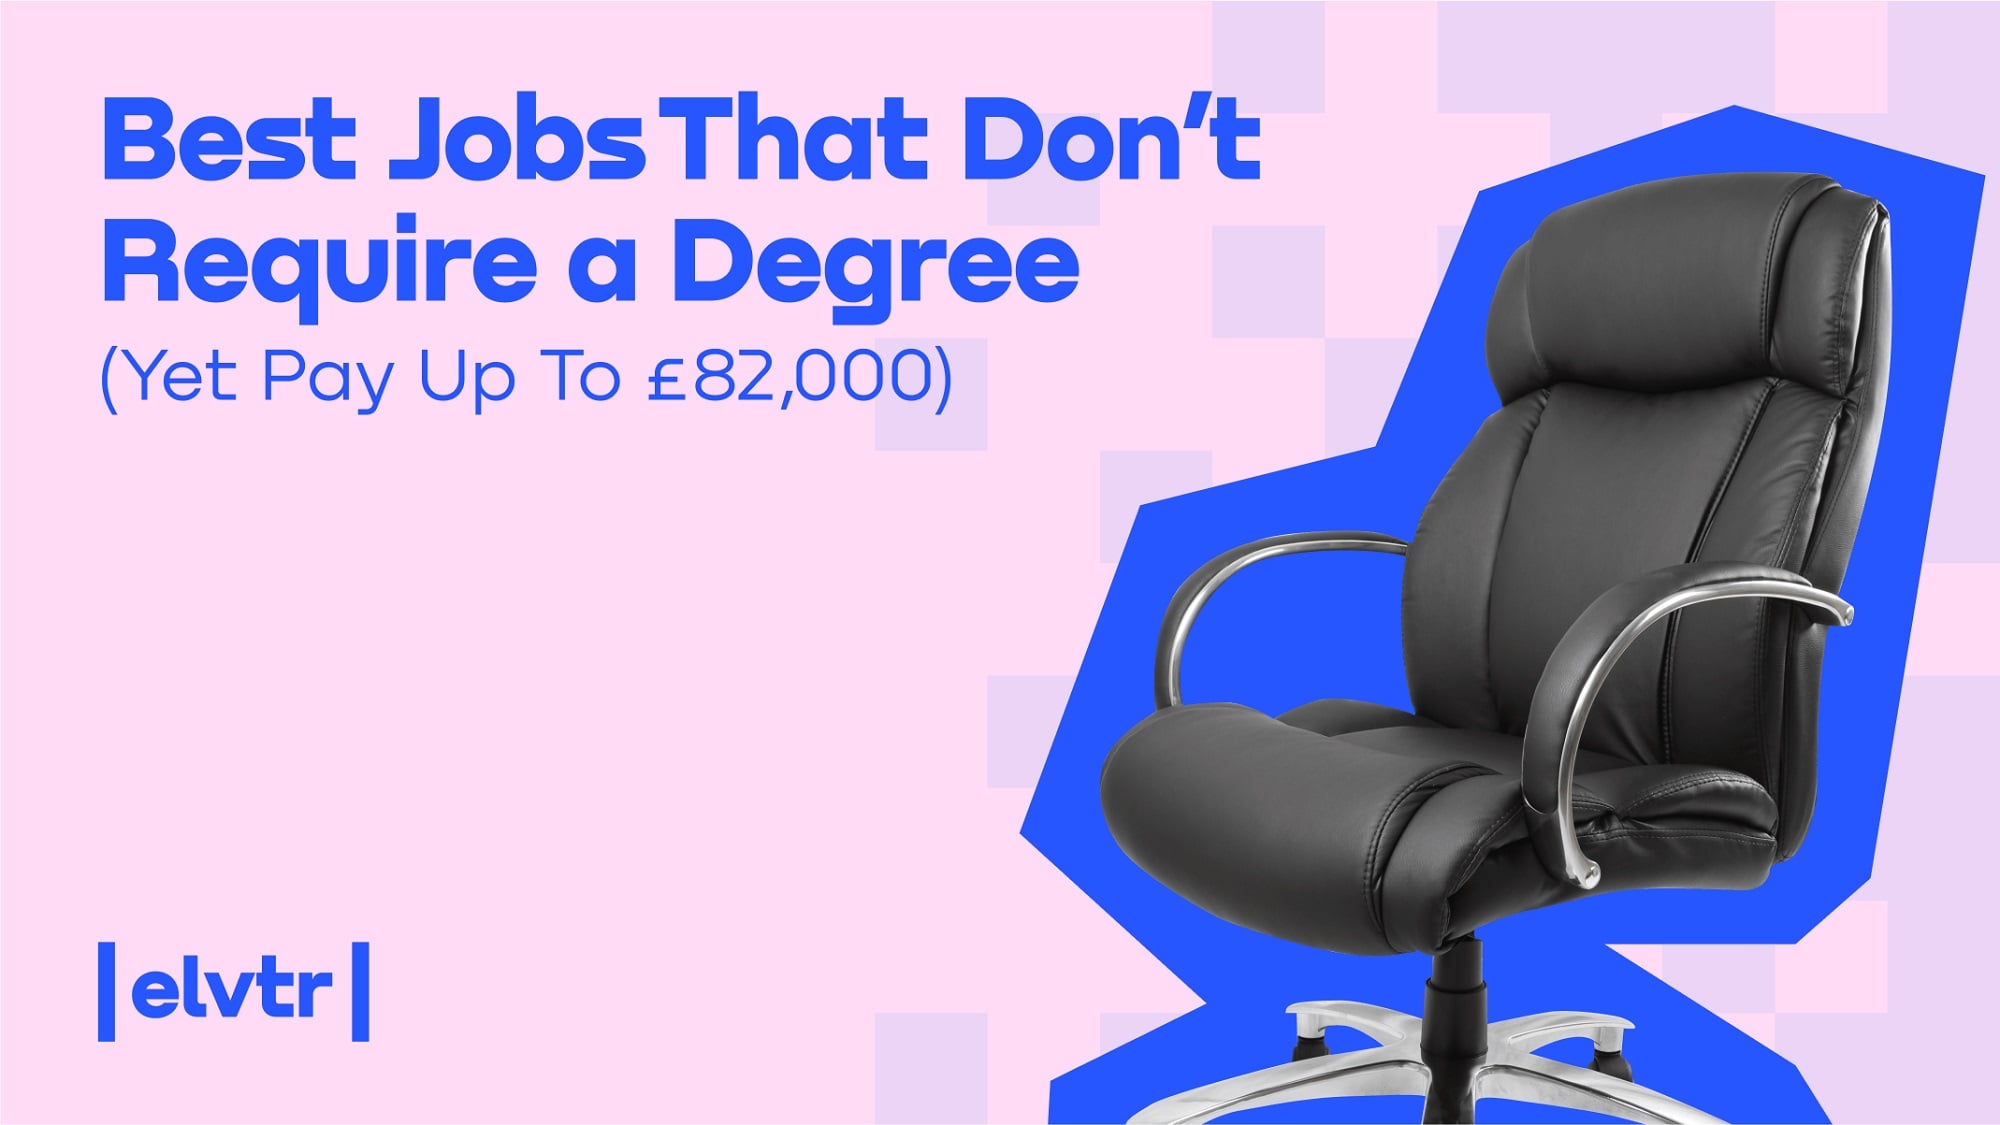 Vacancies that don’t require a degree: 87% image